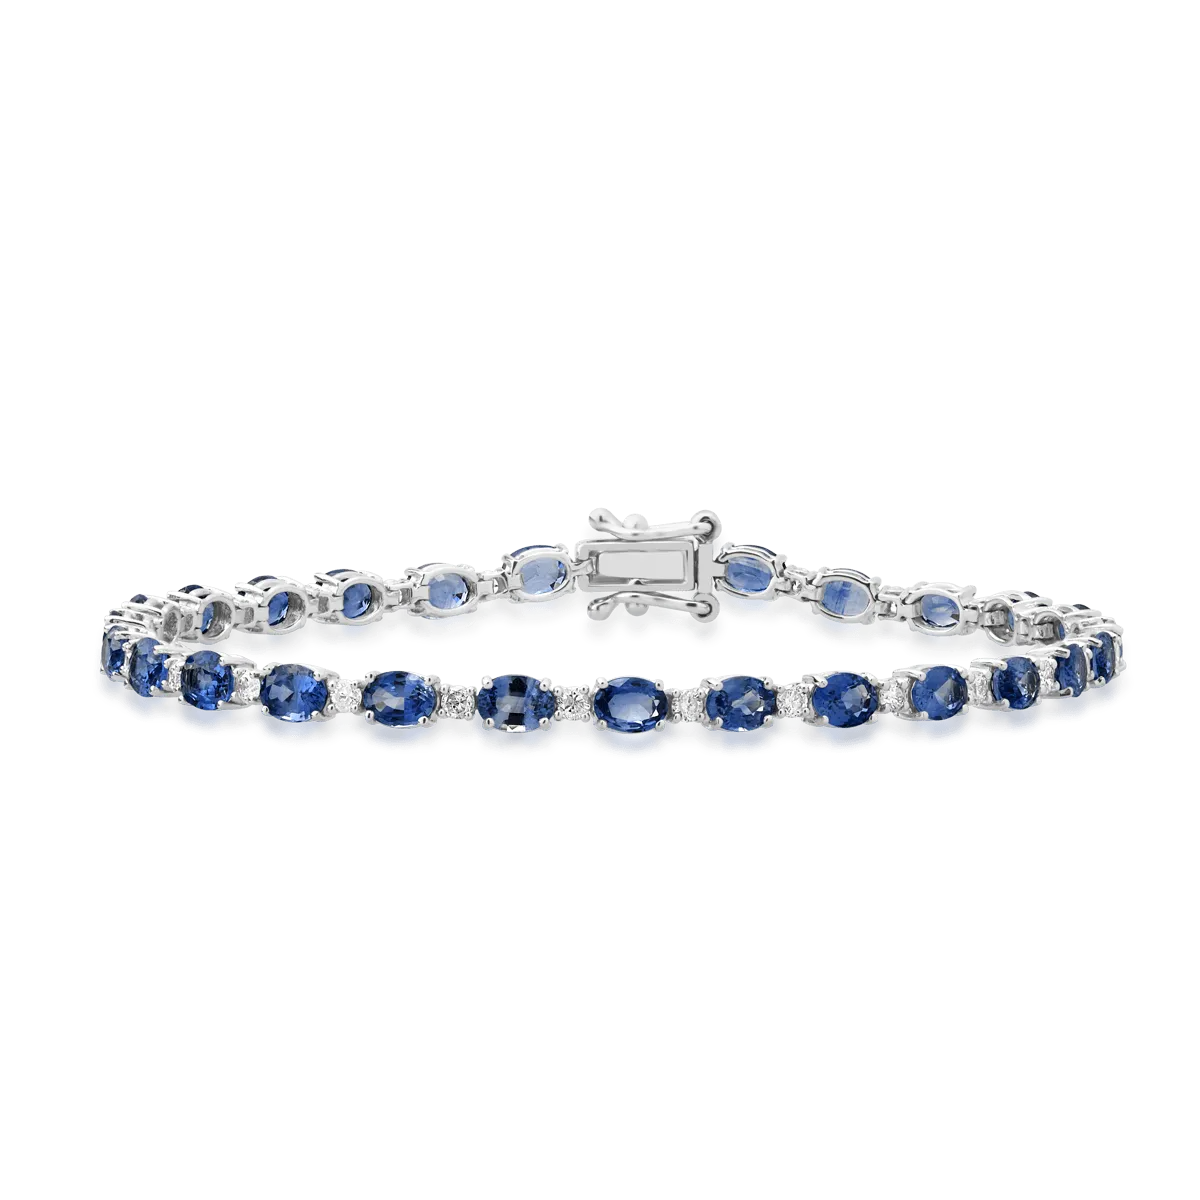 18K white gold tennis bracelet with light blue sapphire of 5.75ct and diamonds of 0.6ct